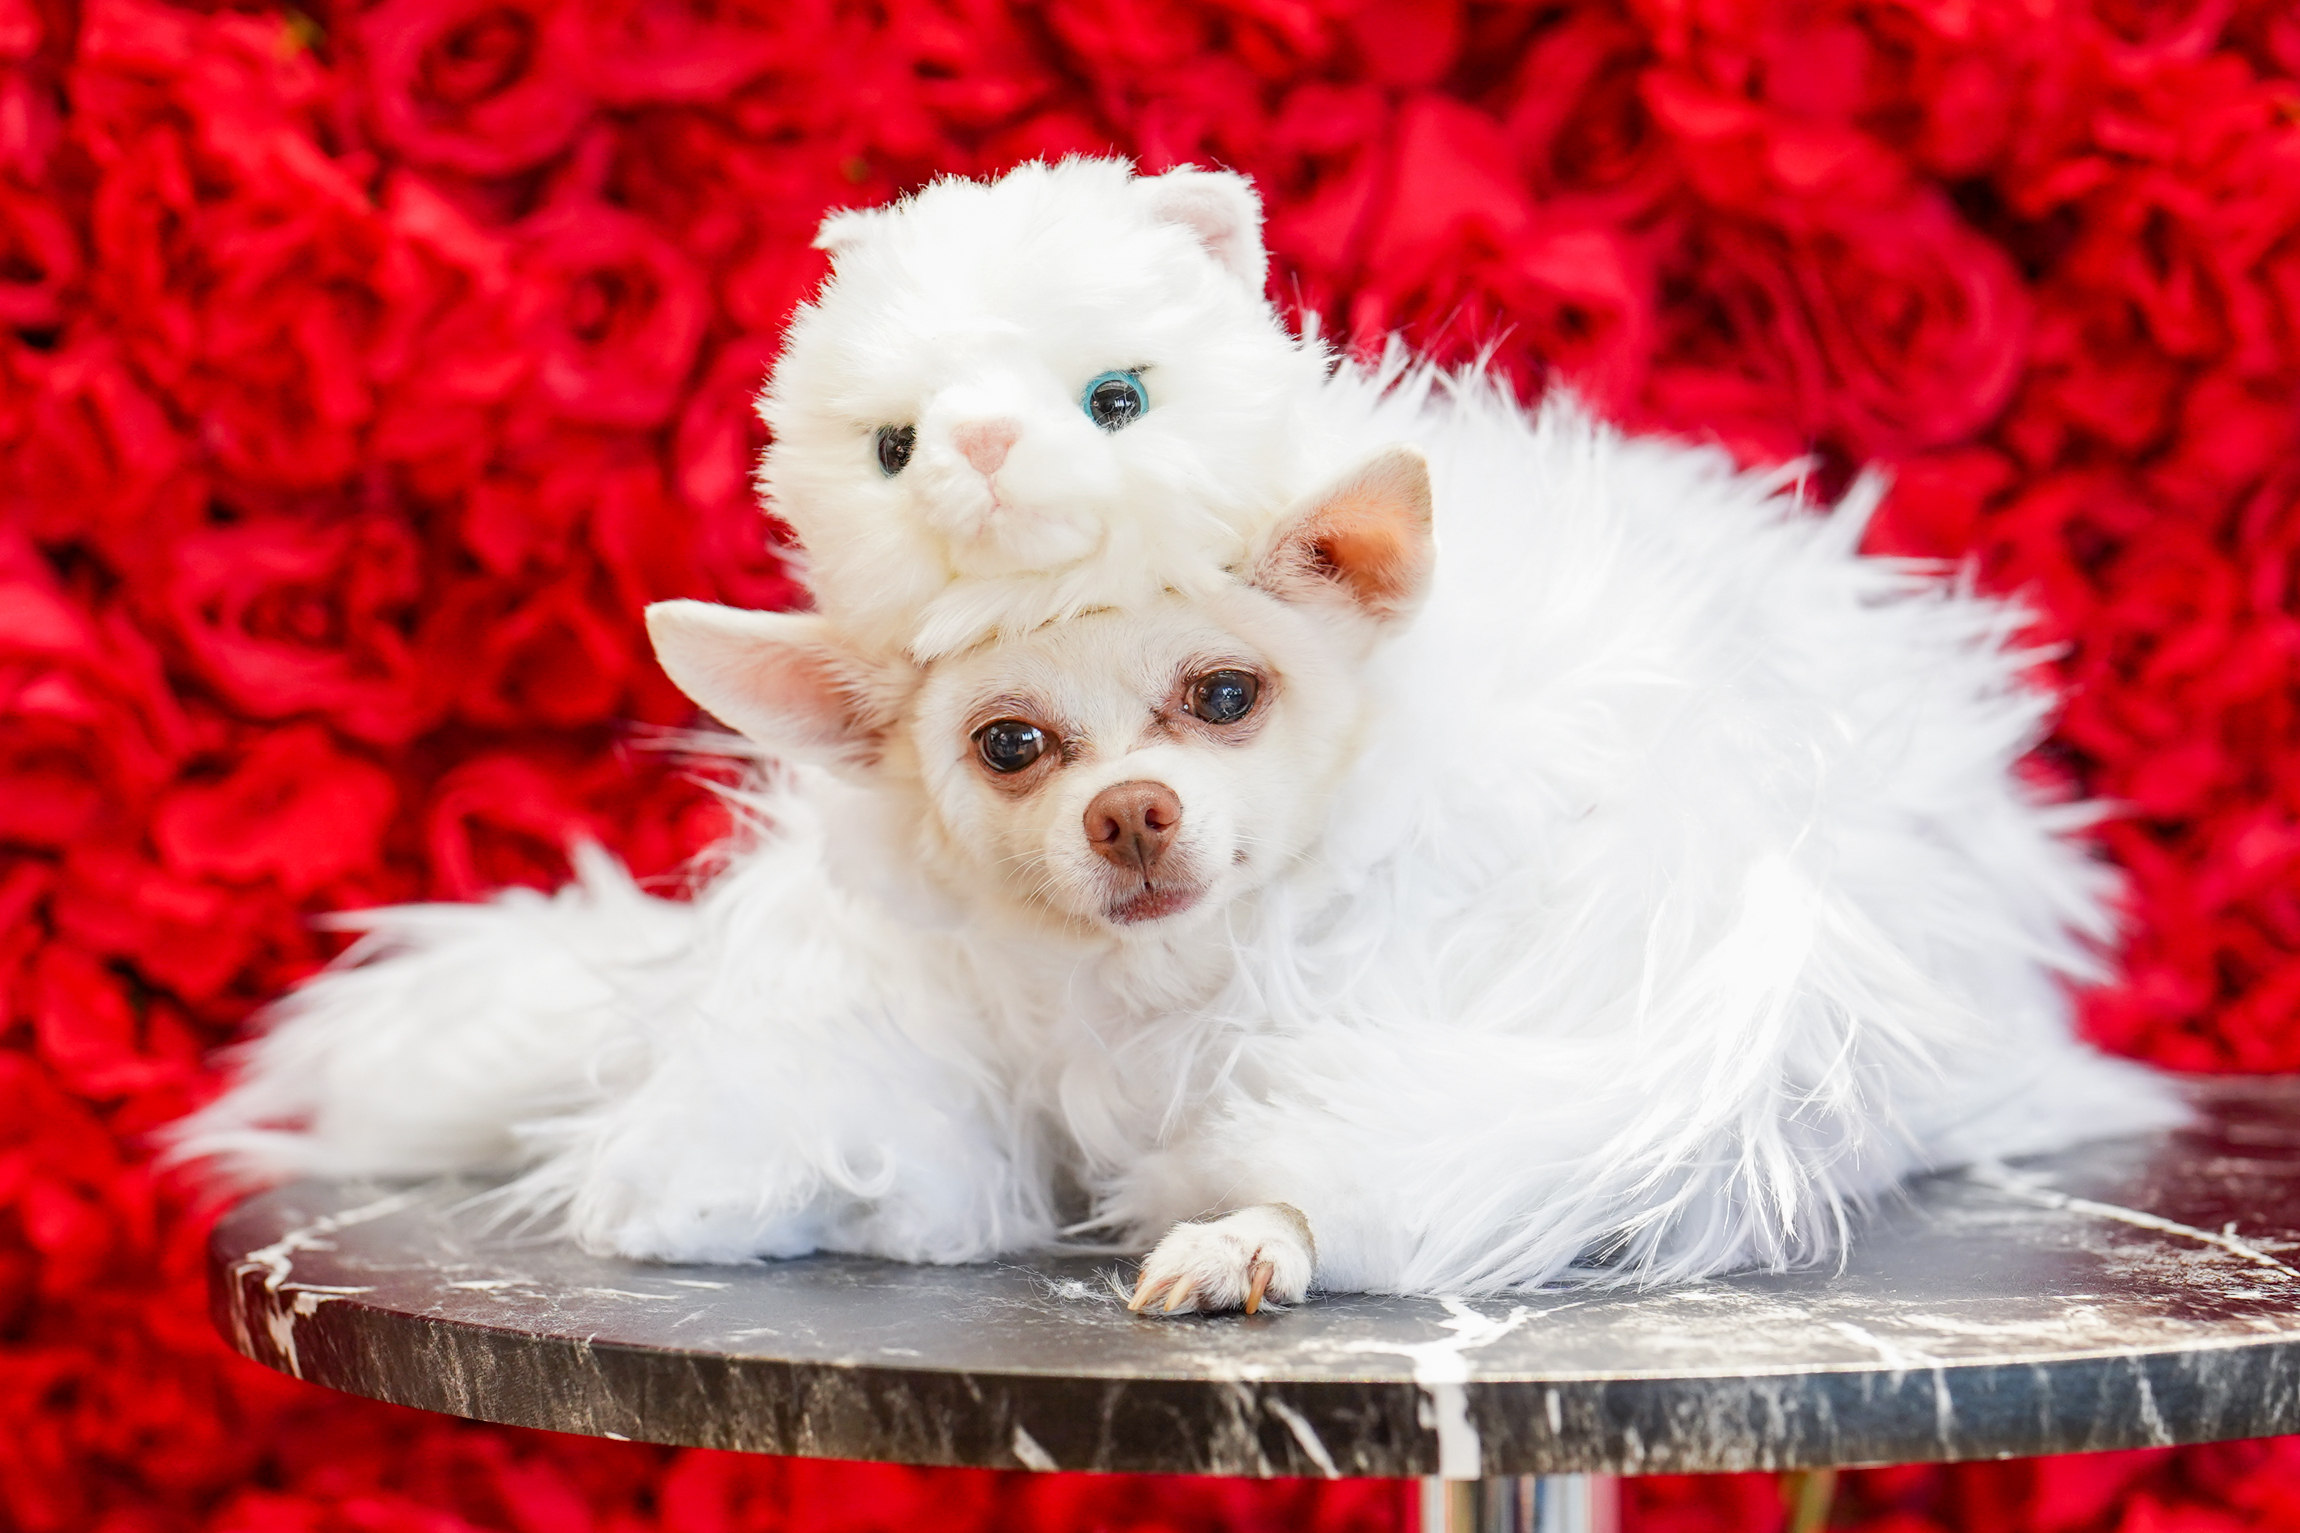 A dog at the Pet Gala in a white cat outfit.